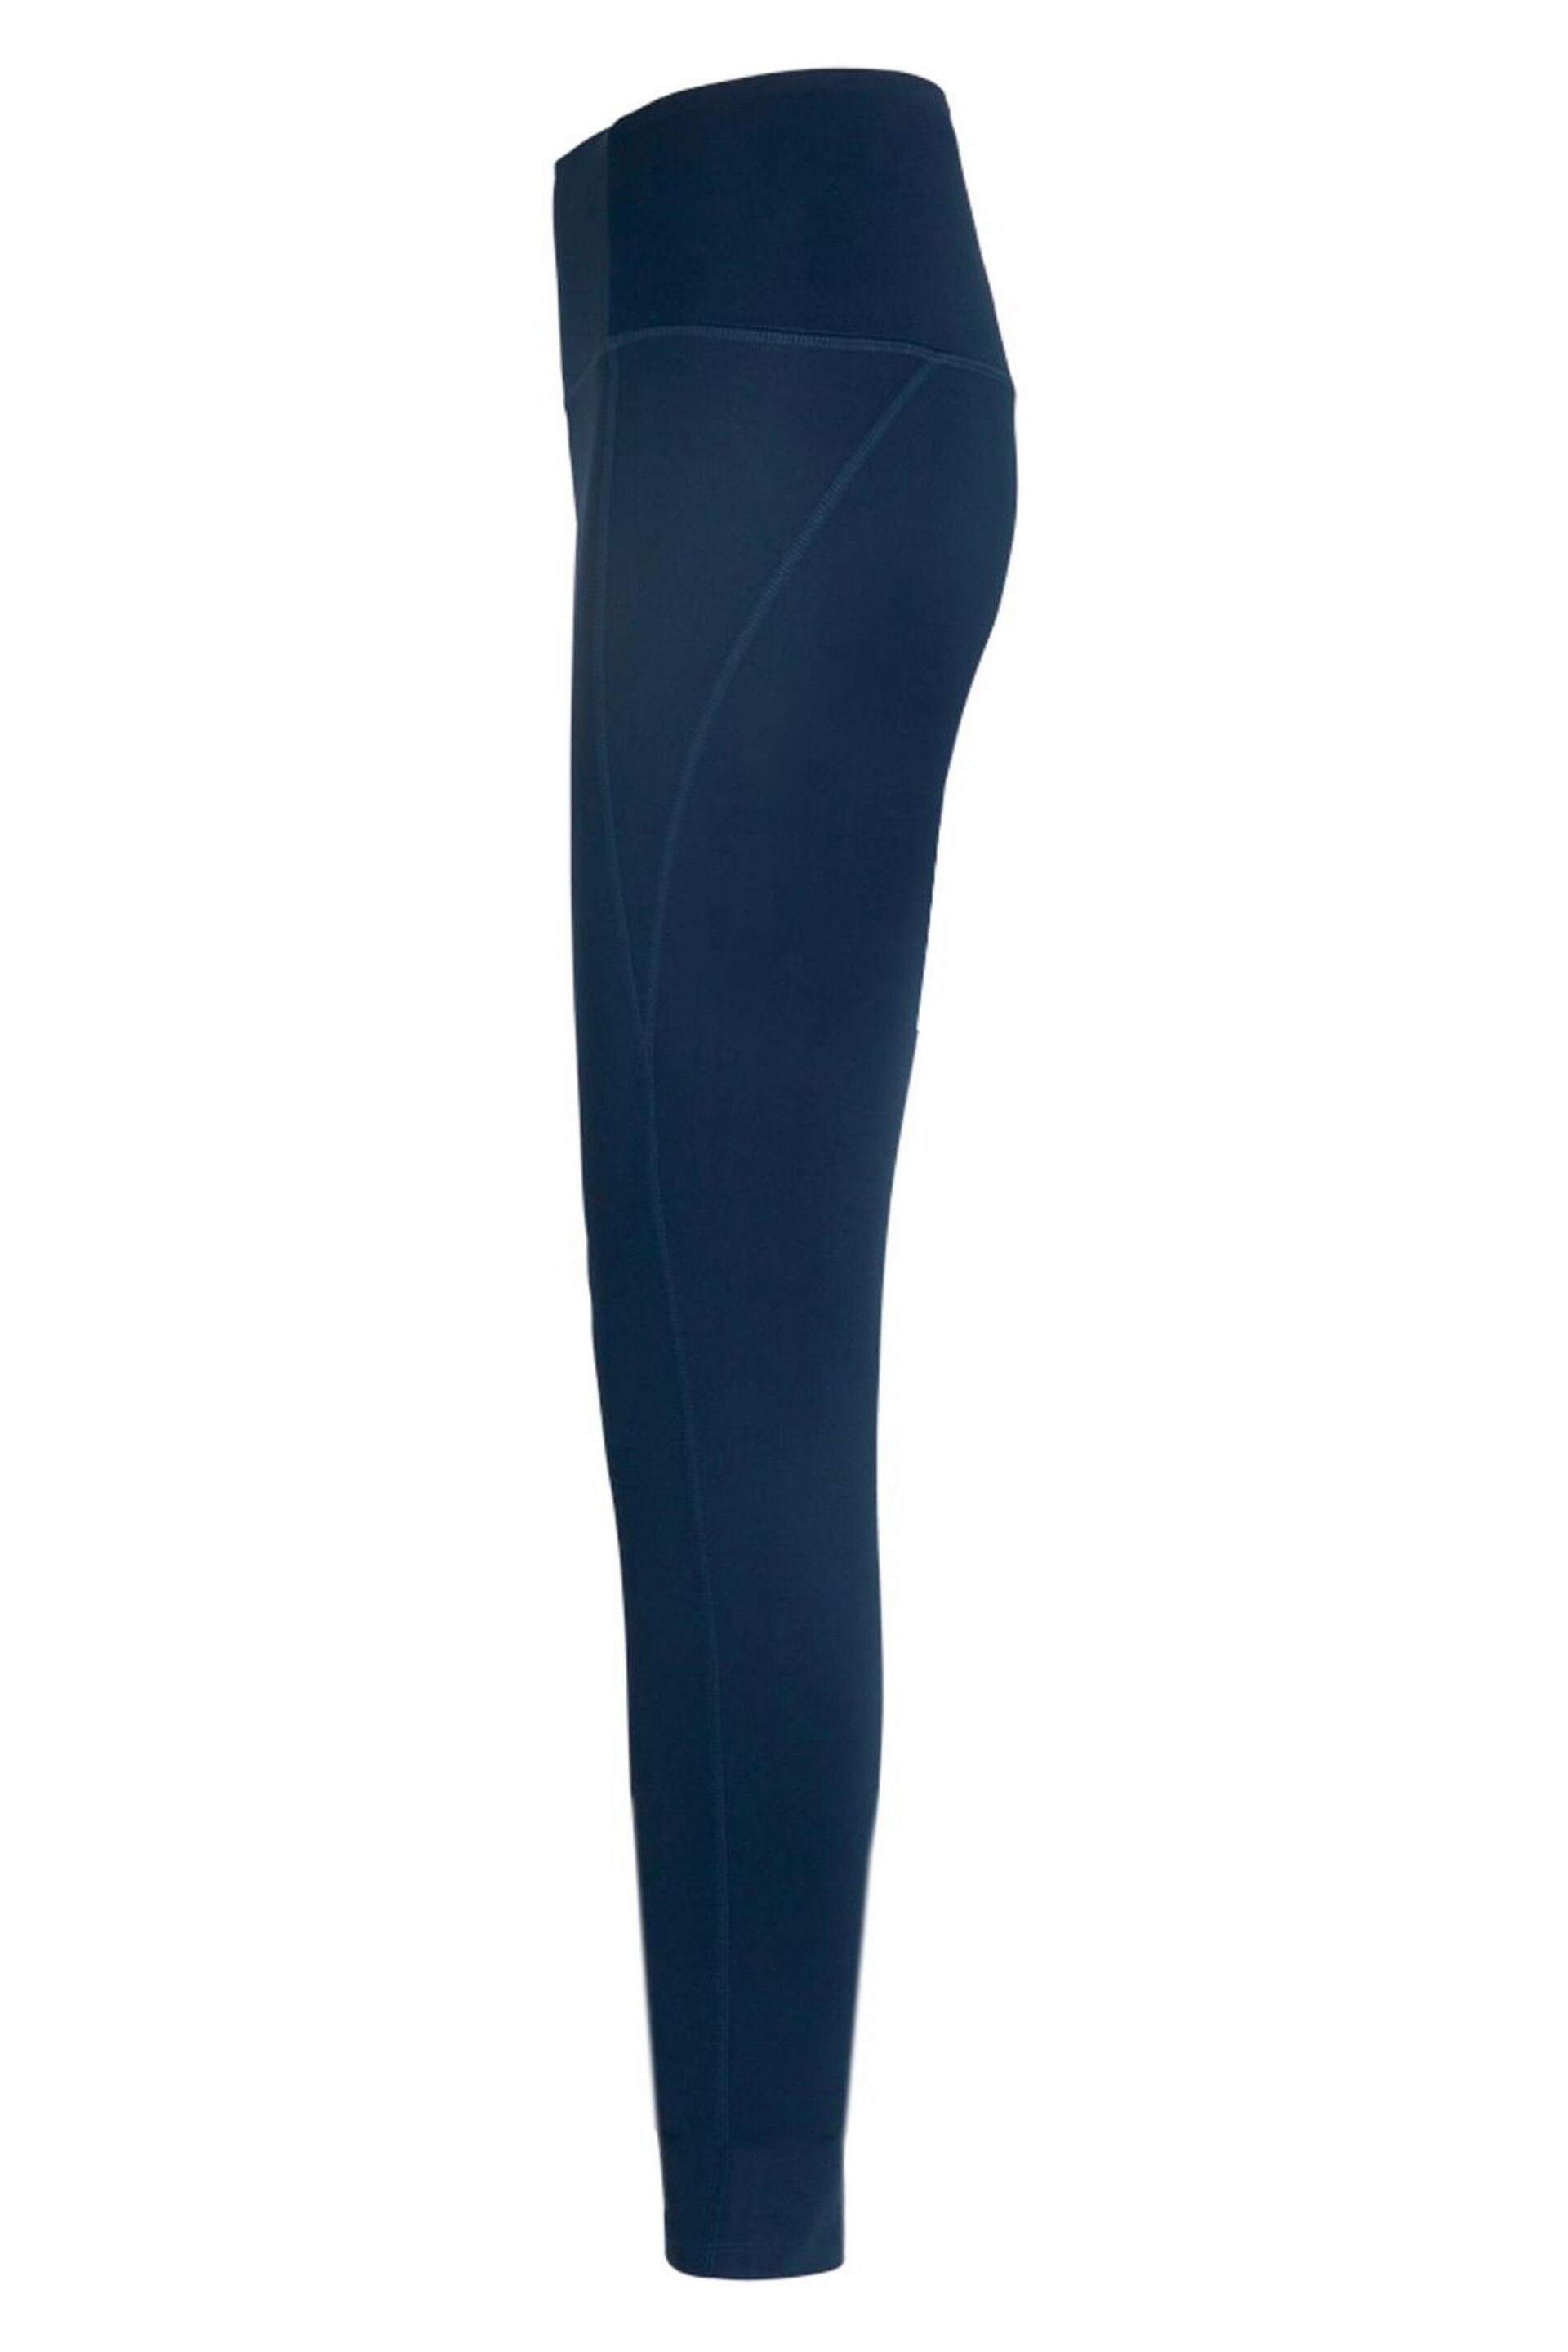 Girlfriend Collective High Rise Compressive Leggings - Image 9 of 9